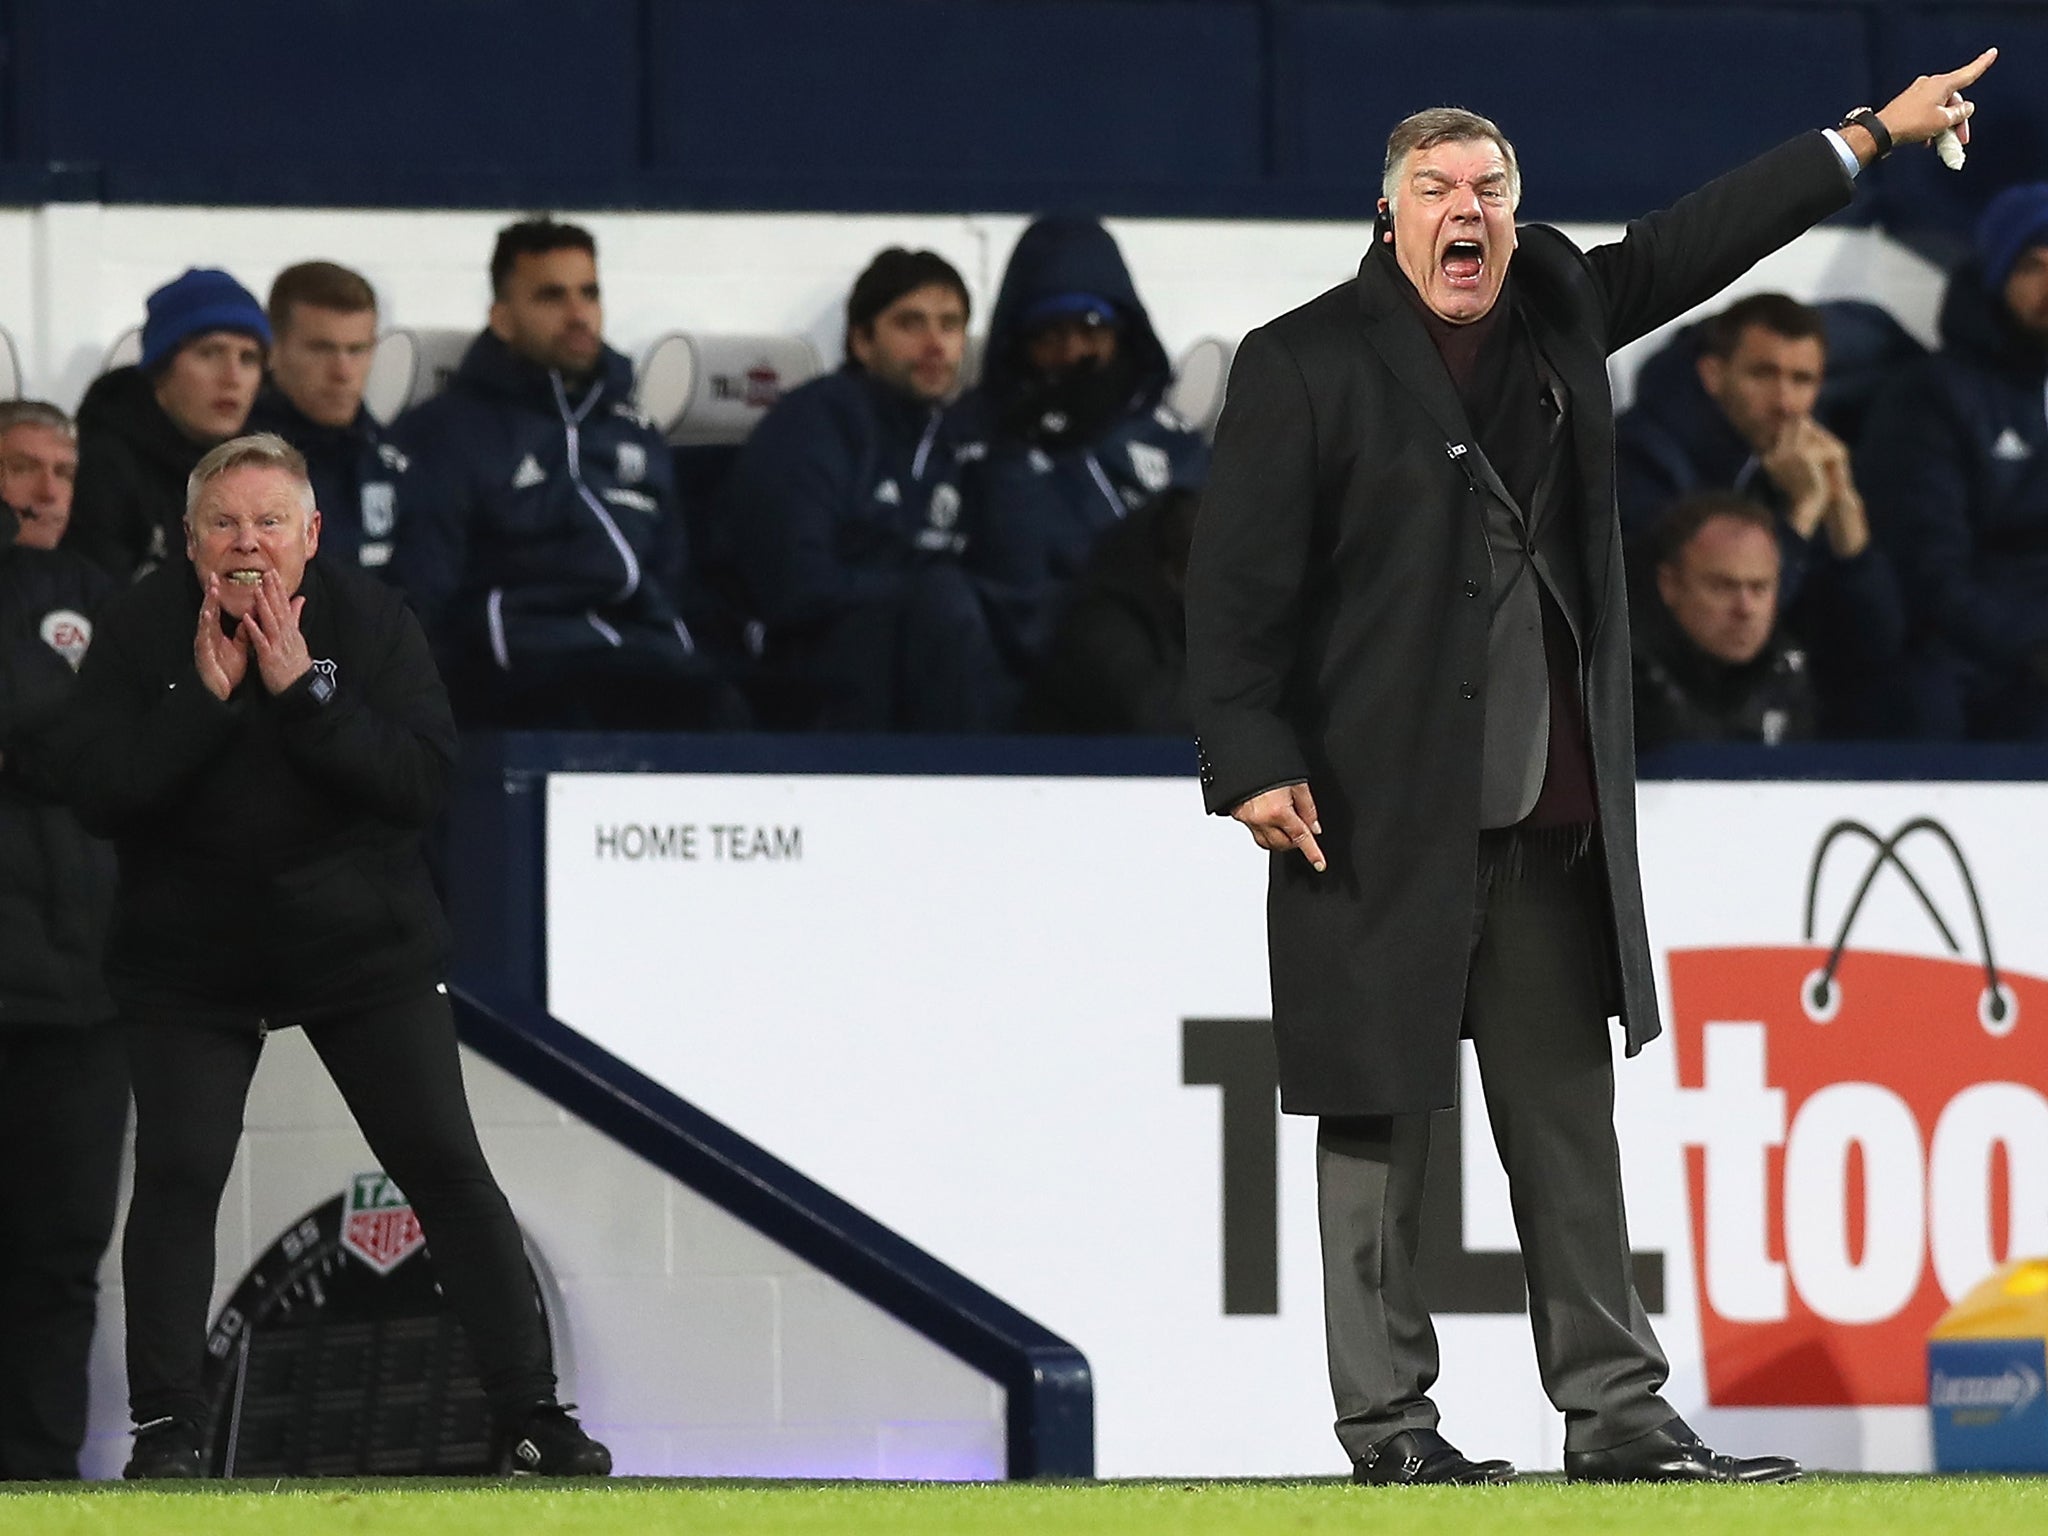 Sam Allardyce shouts instructions to his Everton players